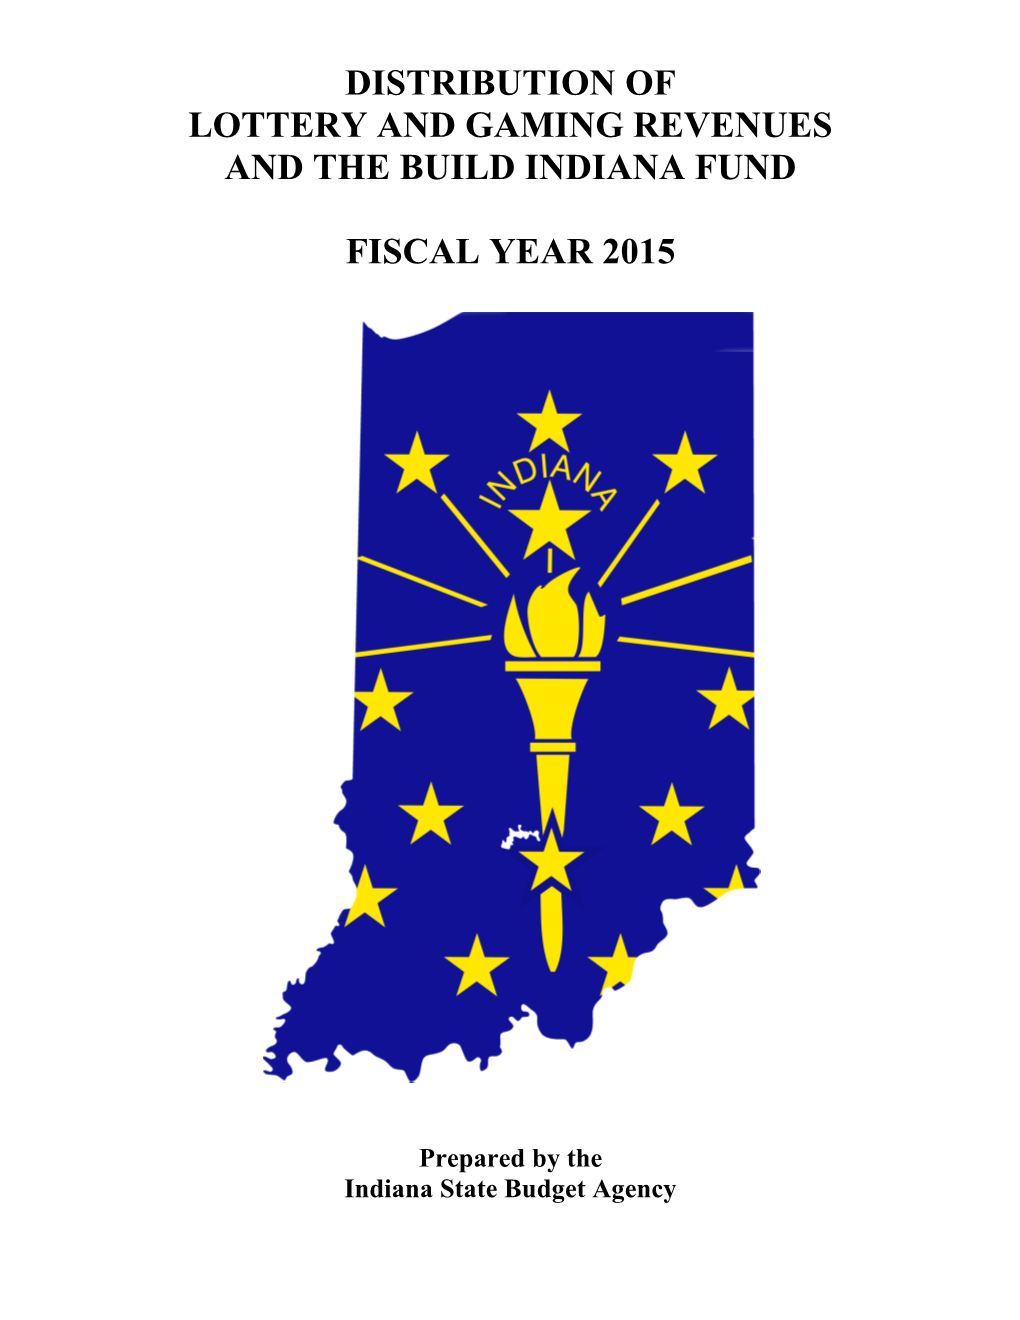 Distribution of Lottery and Gaming Revenues and the Build Indiana Fund